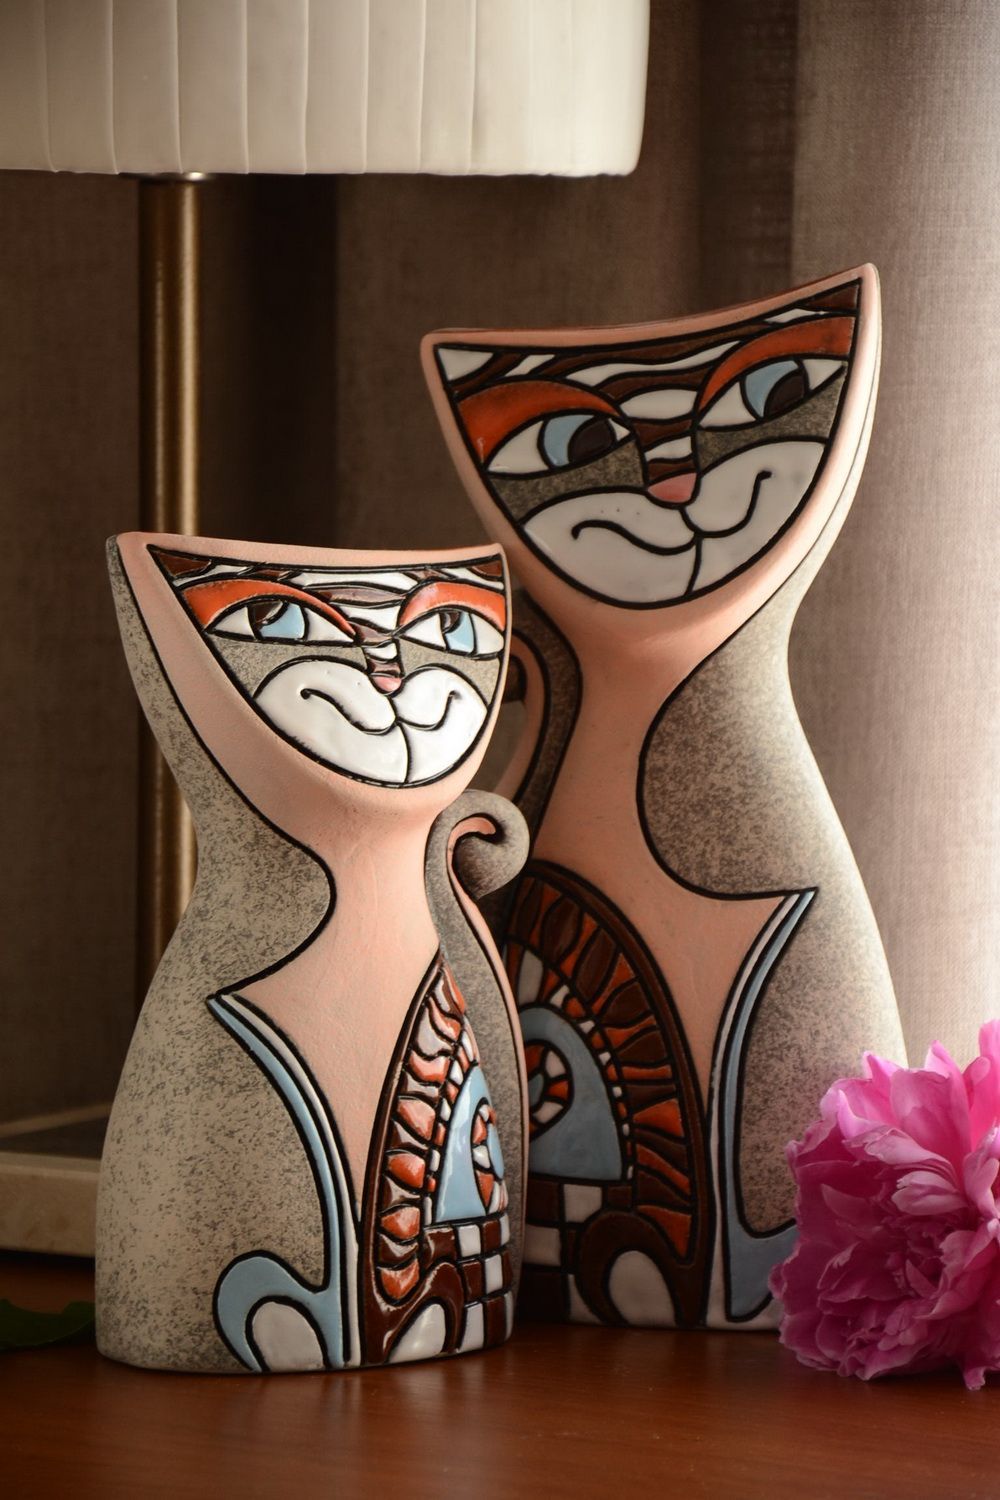 Vase set of 2 ceramic cat shape vases for home décor 12 and 10 inches, 6,19 lb photo 1